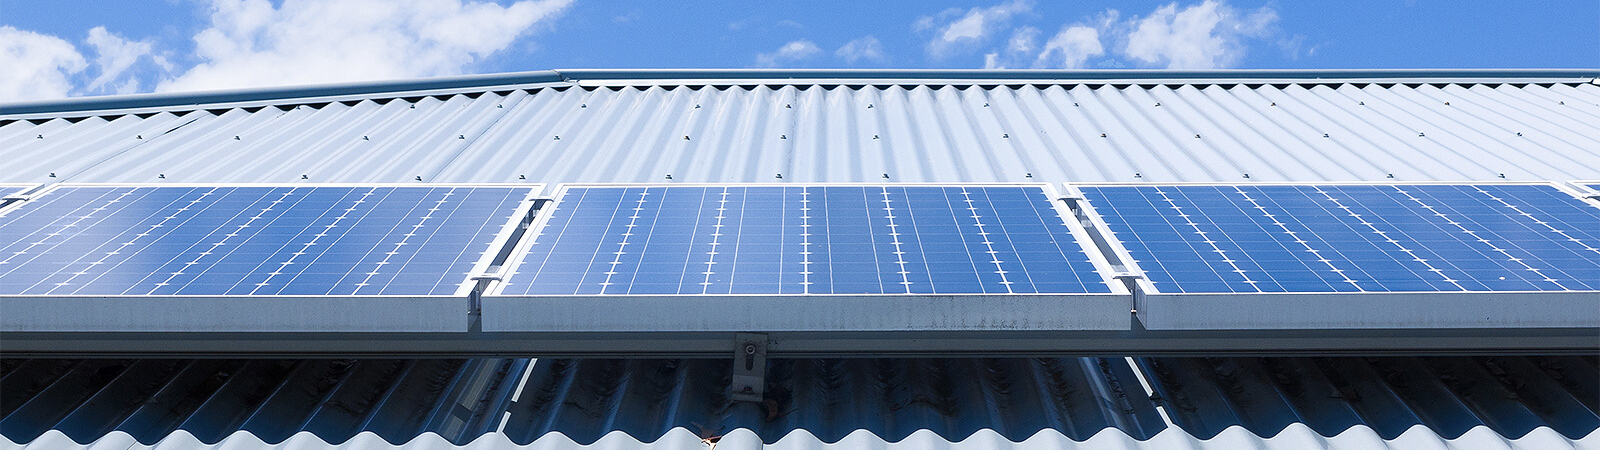 Close up of solar panels on metal roof with sky